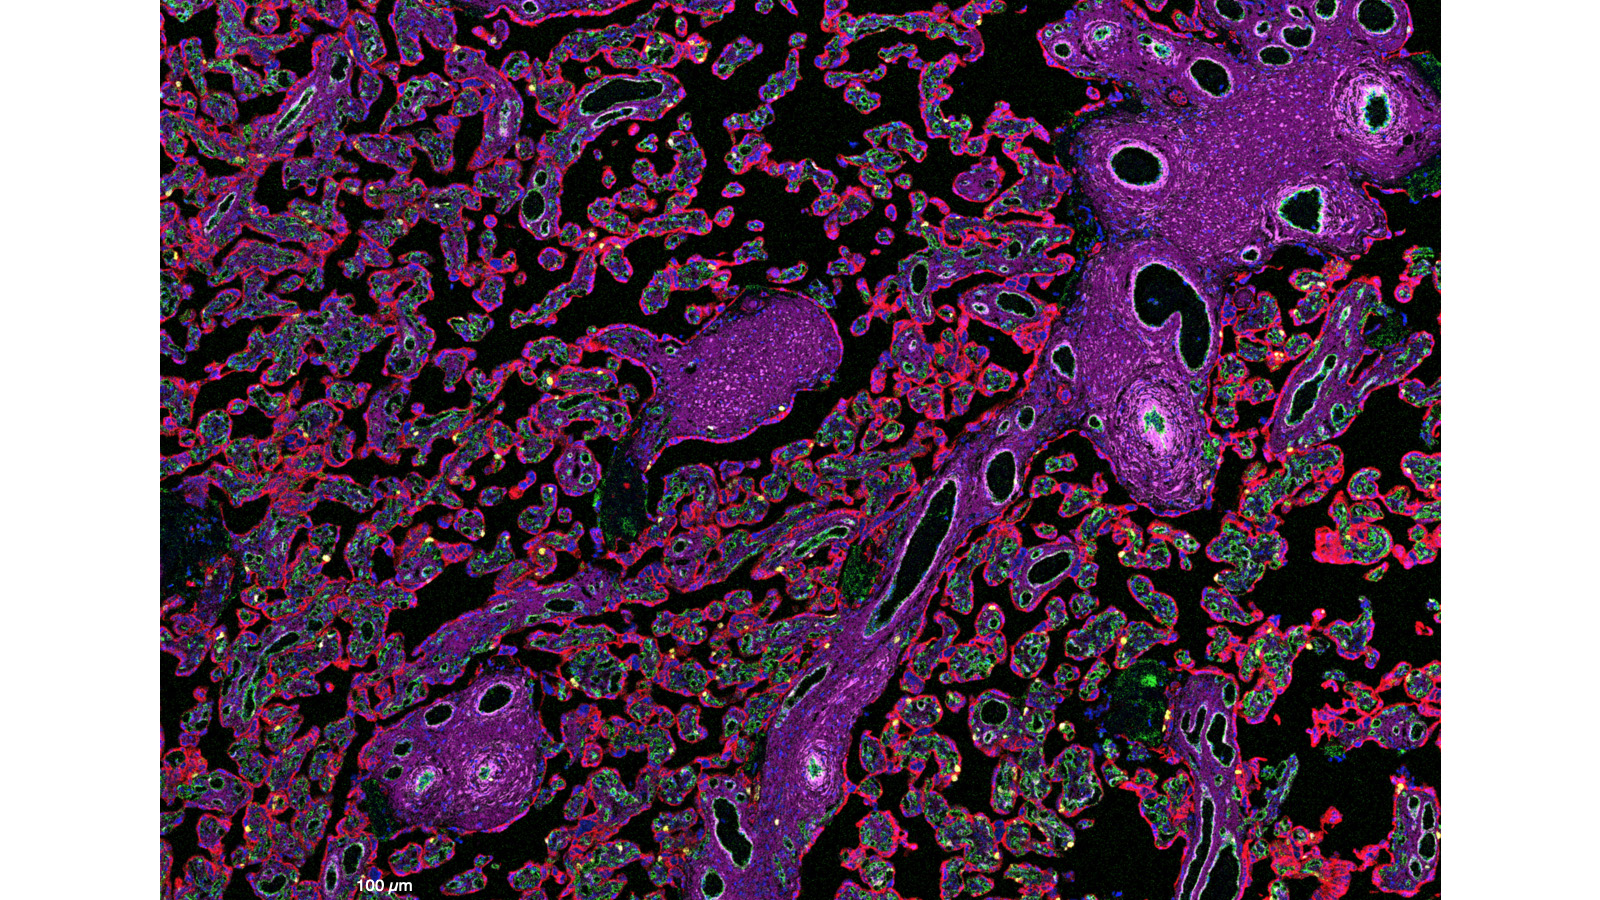 Imaging mass cytometry image of the placenta, courtesy of Santhosh Sivajothi of the Robson lab at JAX